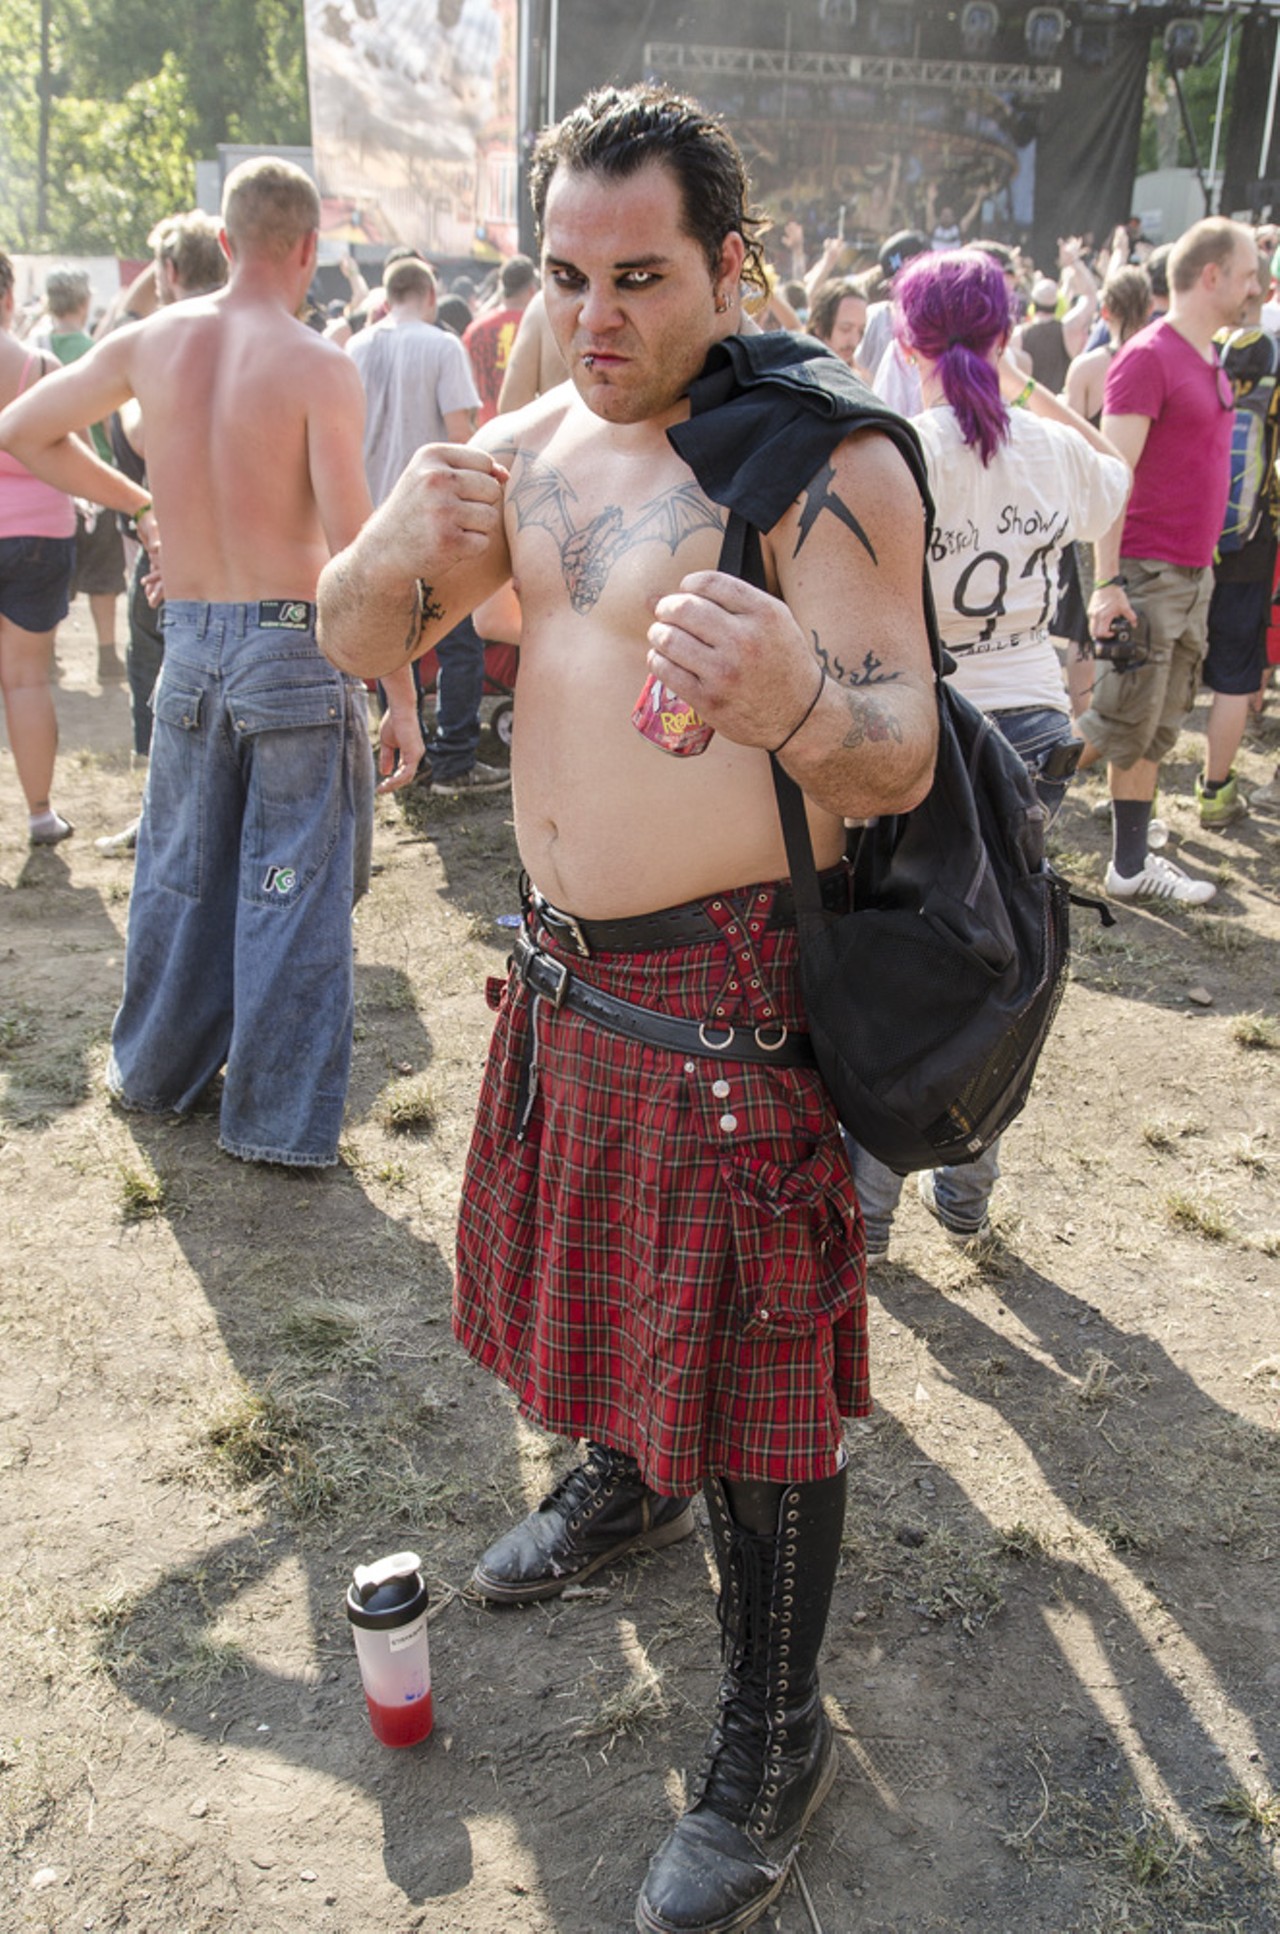 Everything we saw at the Gathering of the Juggalos